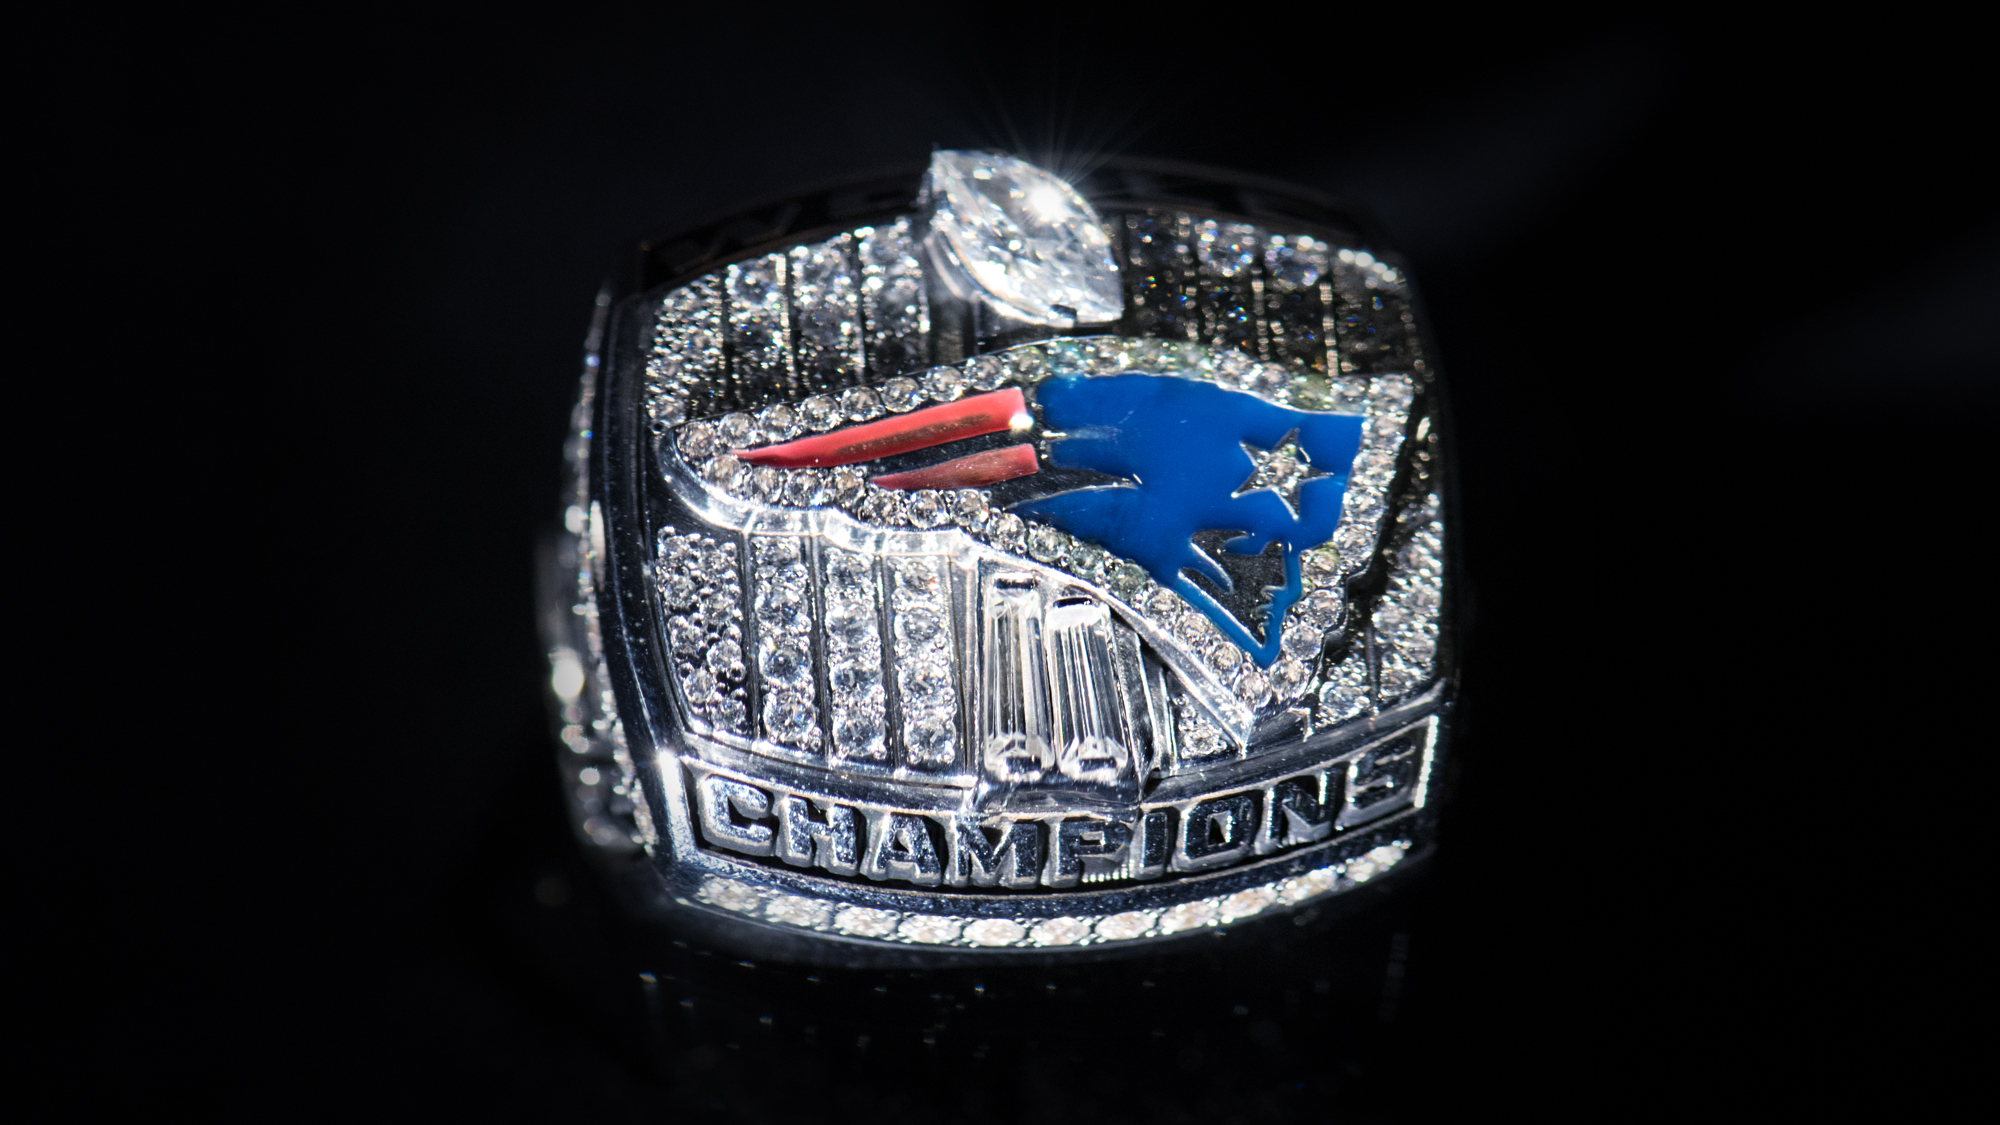 Gillette Gems: See All 6 of Tom Brady's Patriots Super Bowl Rings